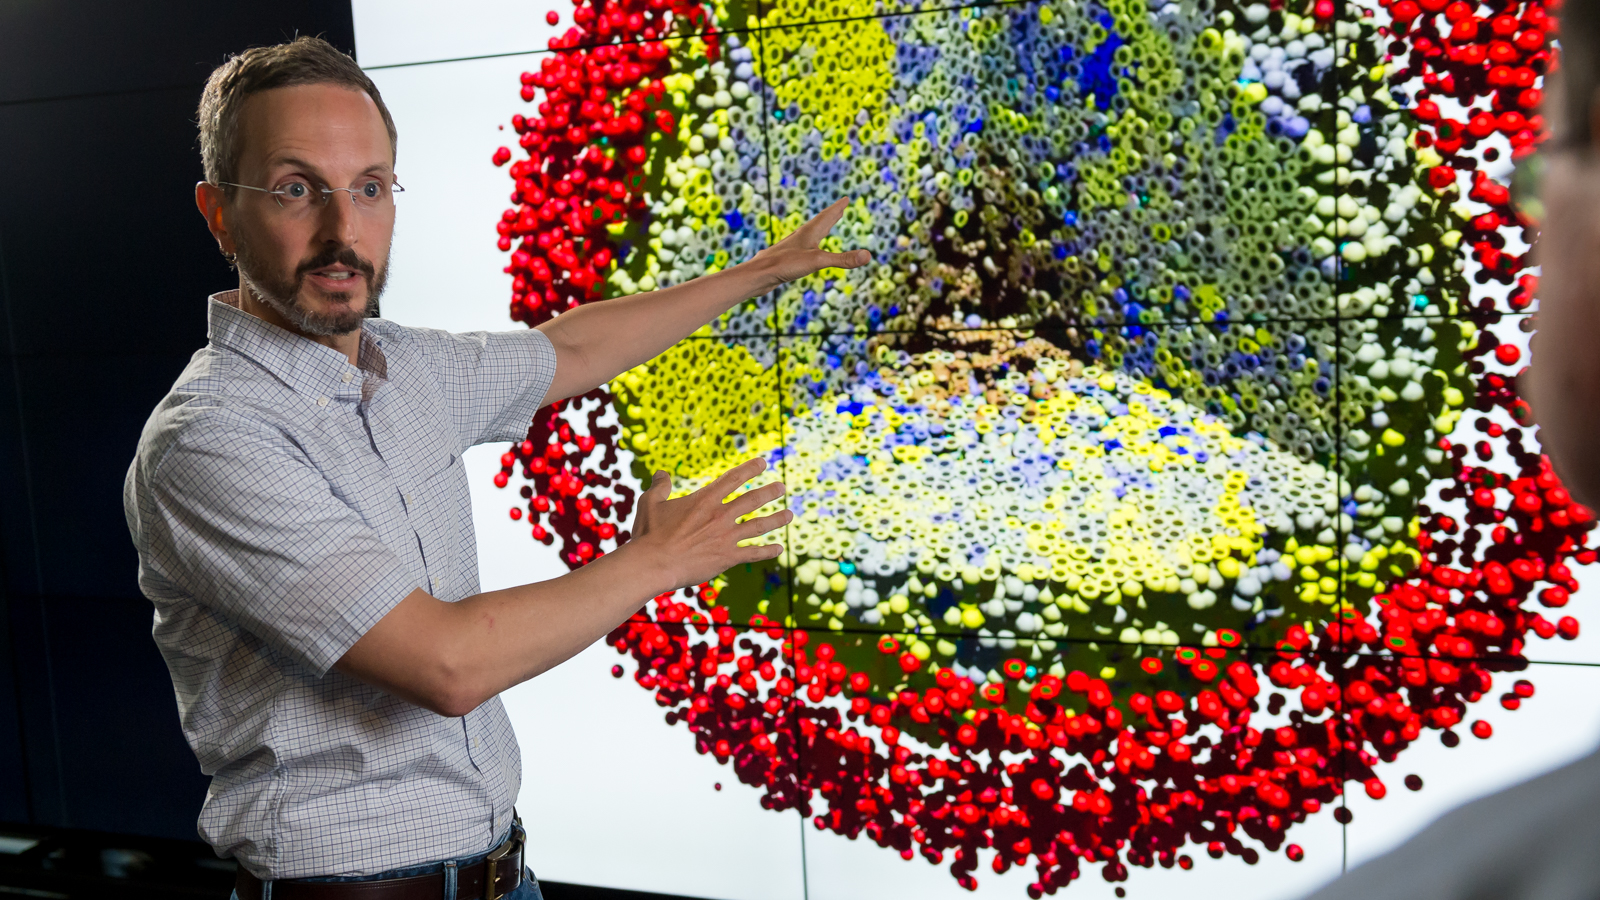 Argonne’s Jonathan Ozik (pictured) and Nicholson Collier are searching for clues on how to improve cancer immunotherapy by harnessing the power of supercomputers at Argonne and the University of Chicago.